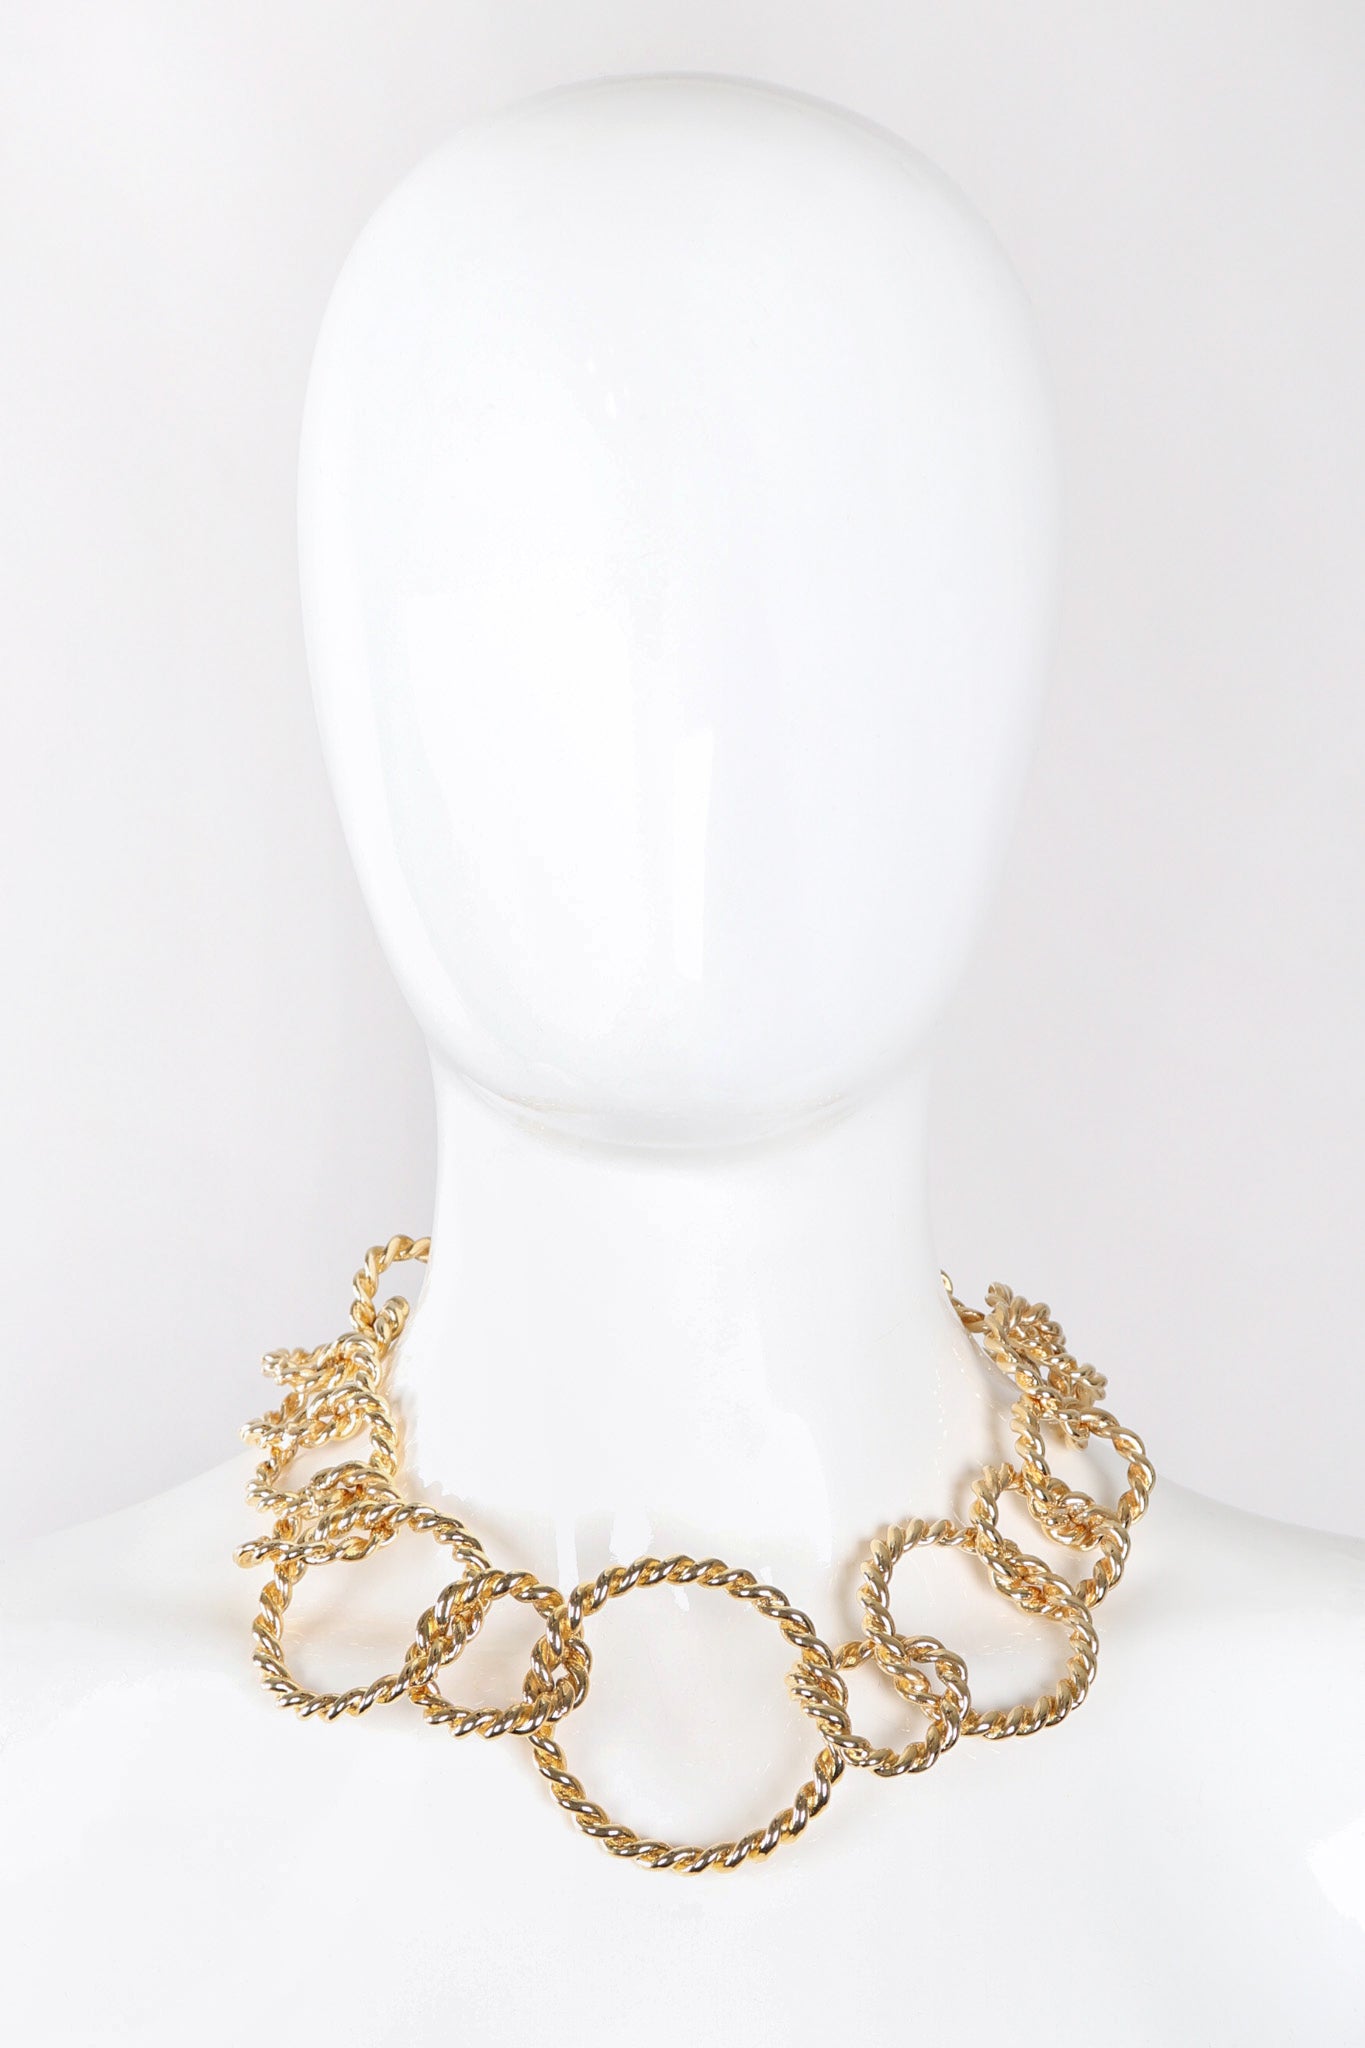 Recess Los Angeles Vintage Gold Twisted Rope Link Collar Necklace